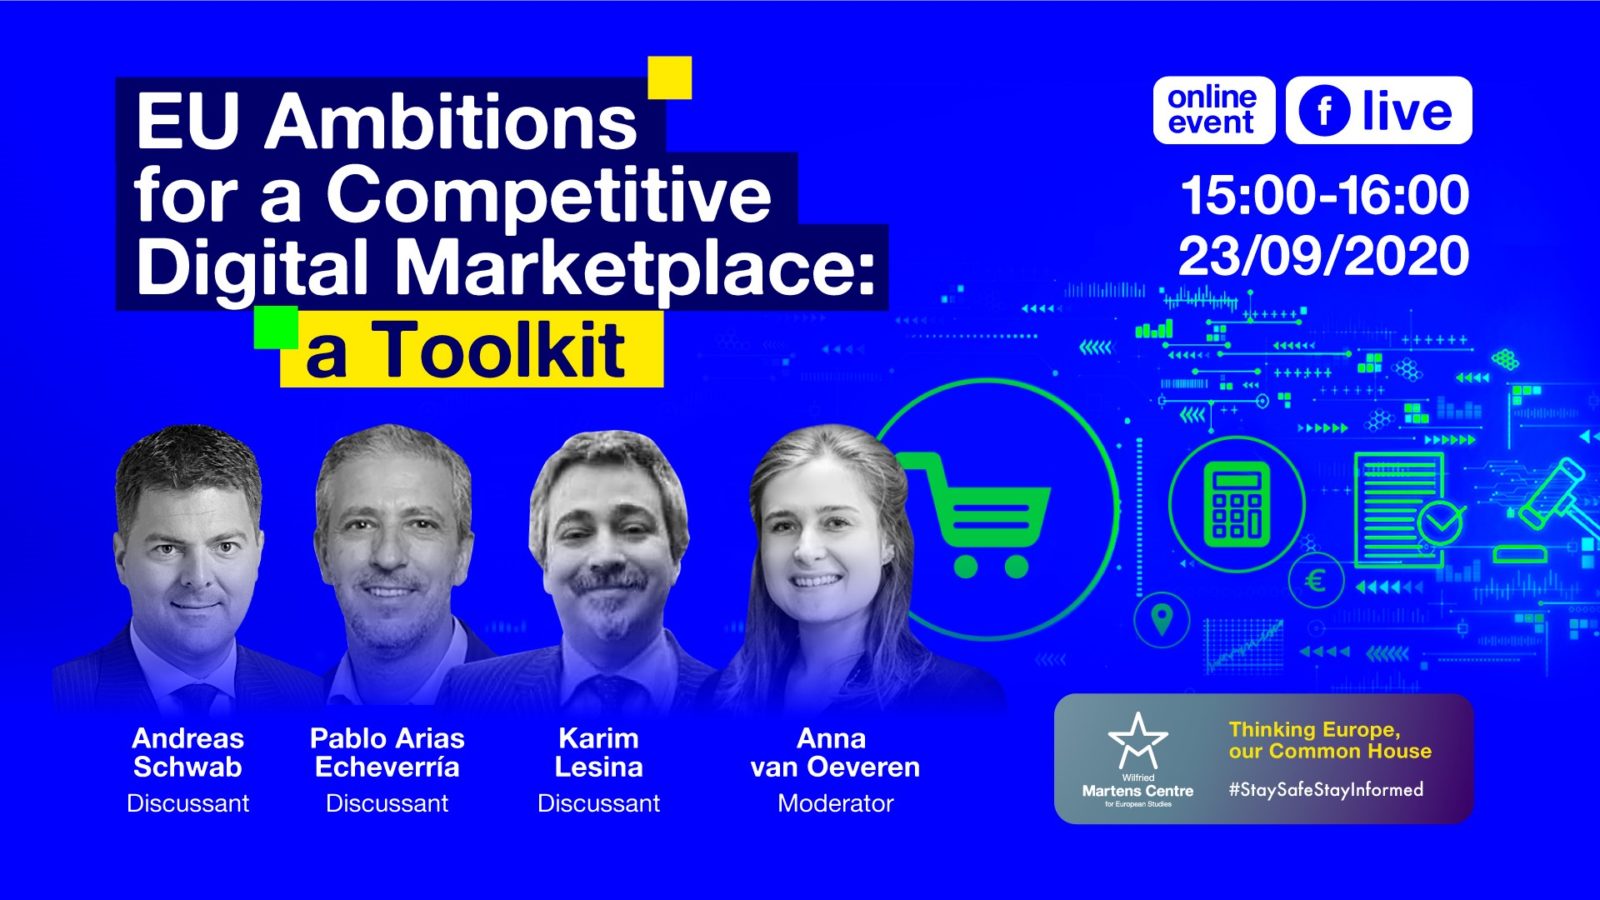 Online Event ‘EU Ambitions for a Competitive Digital Marketplace: a Toolkit’